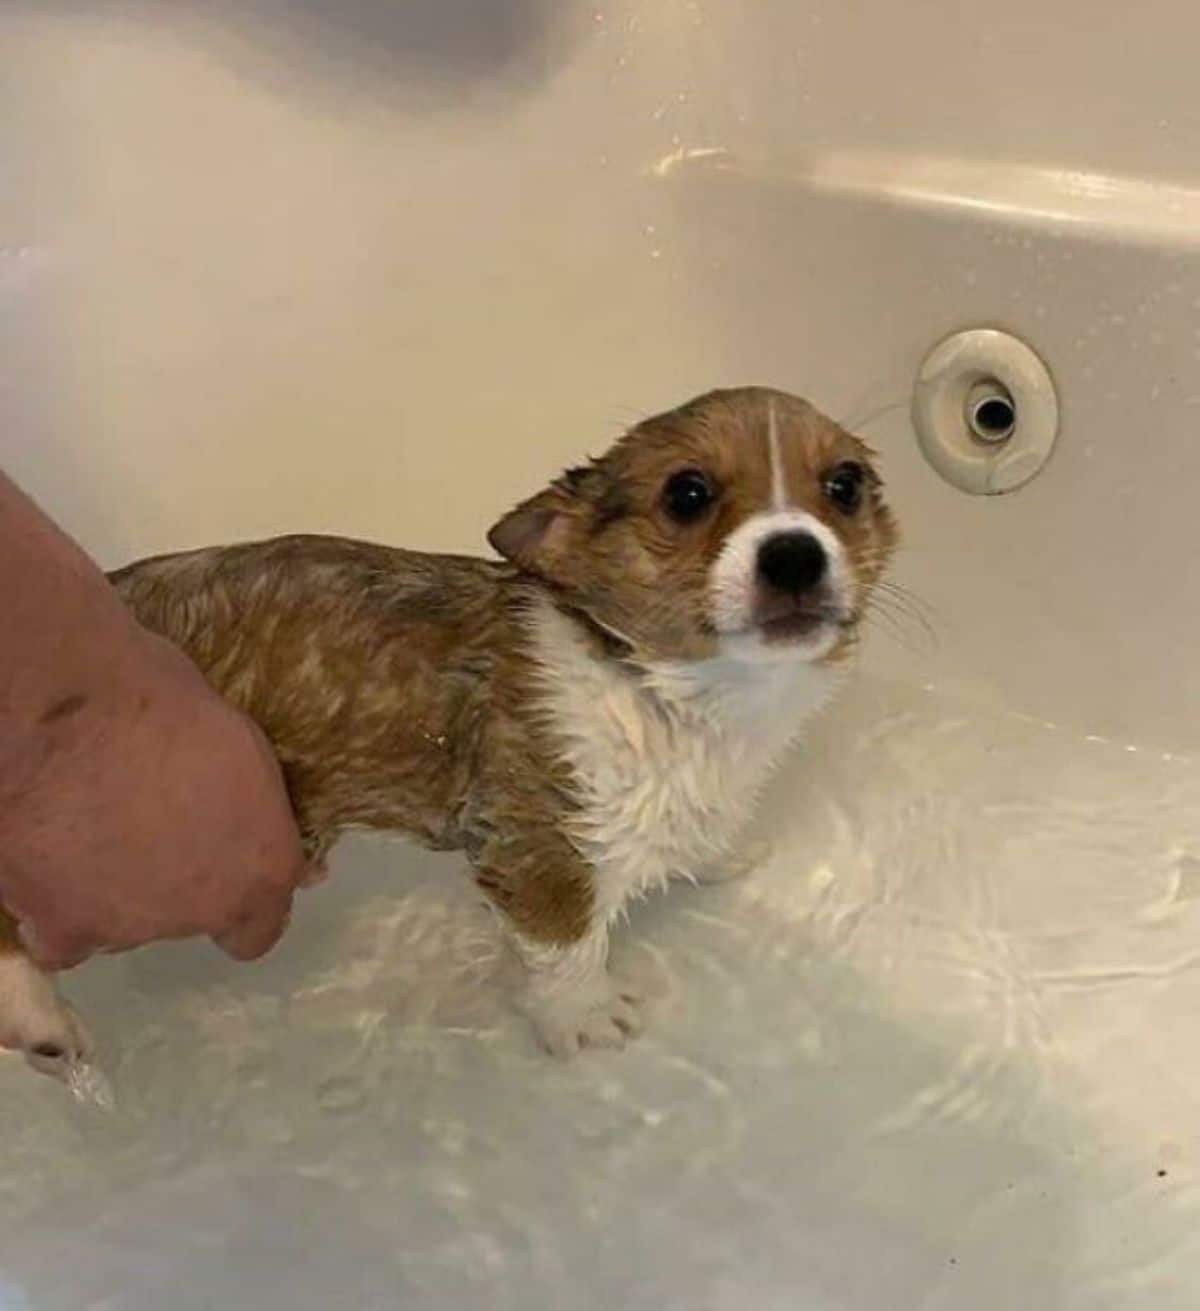 brown and white puppy wet in a bathtub filled partway with water